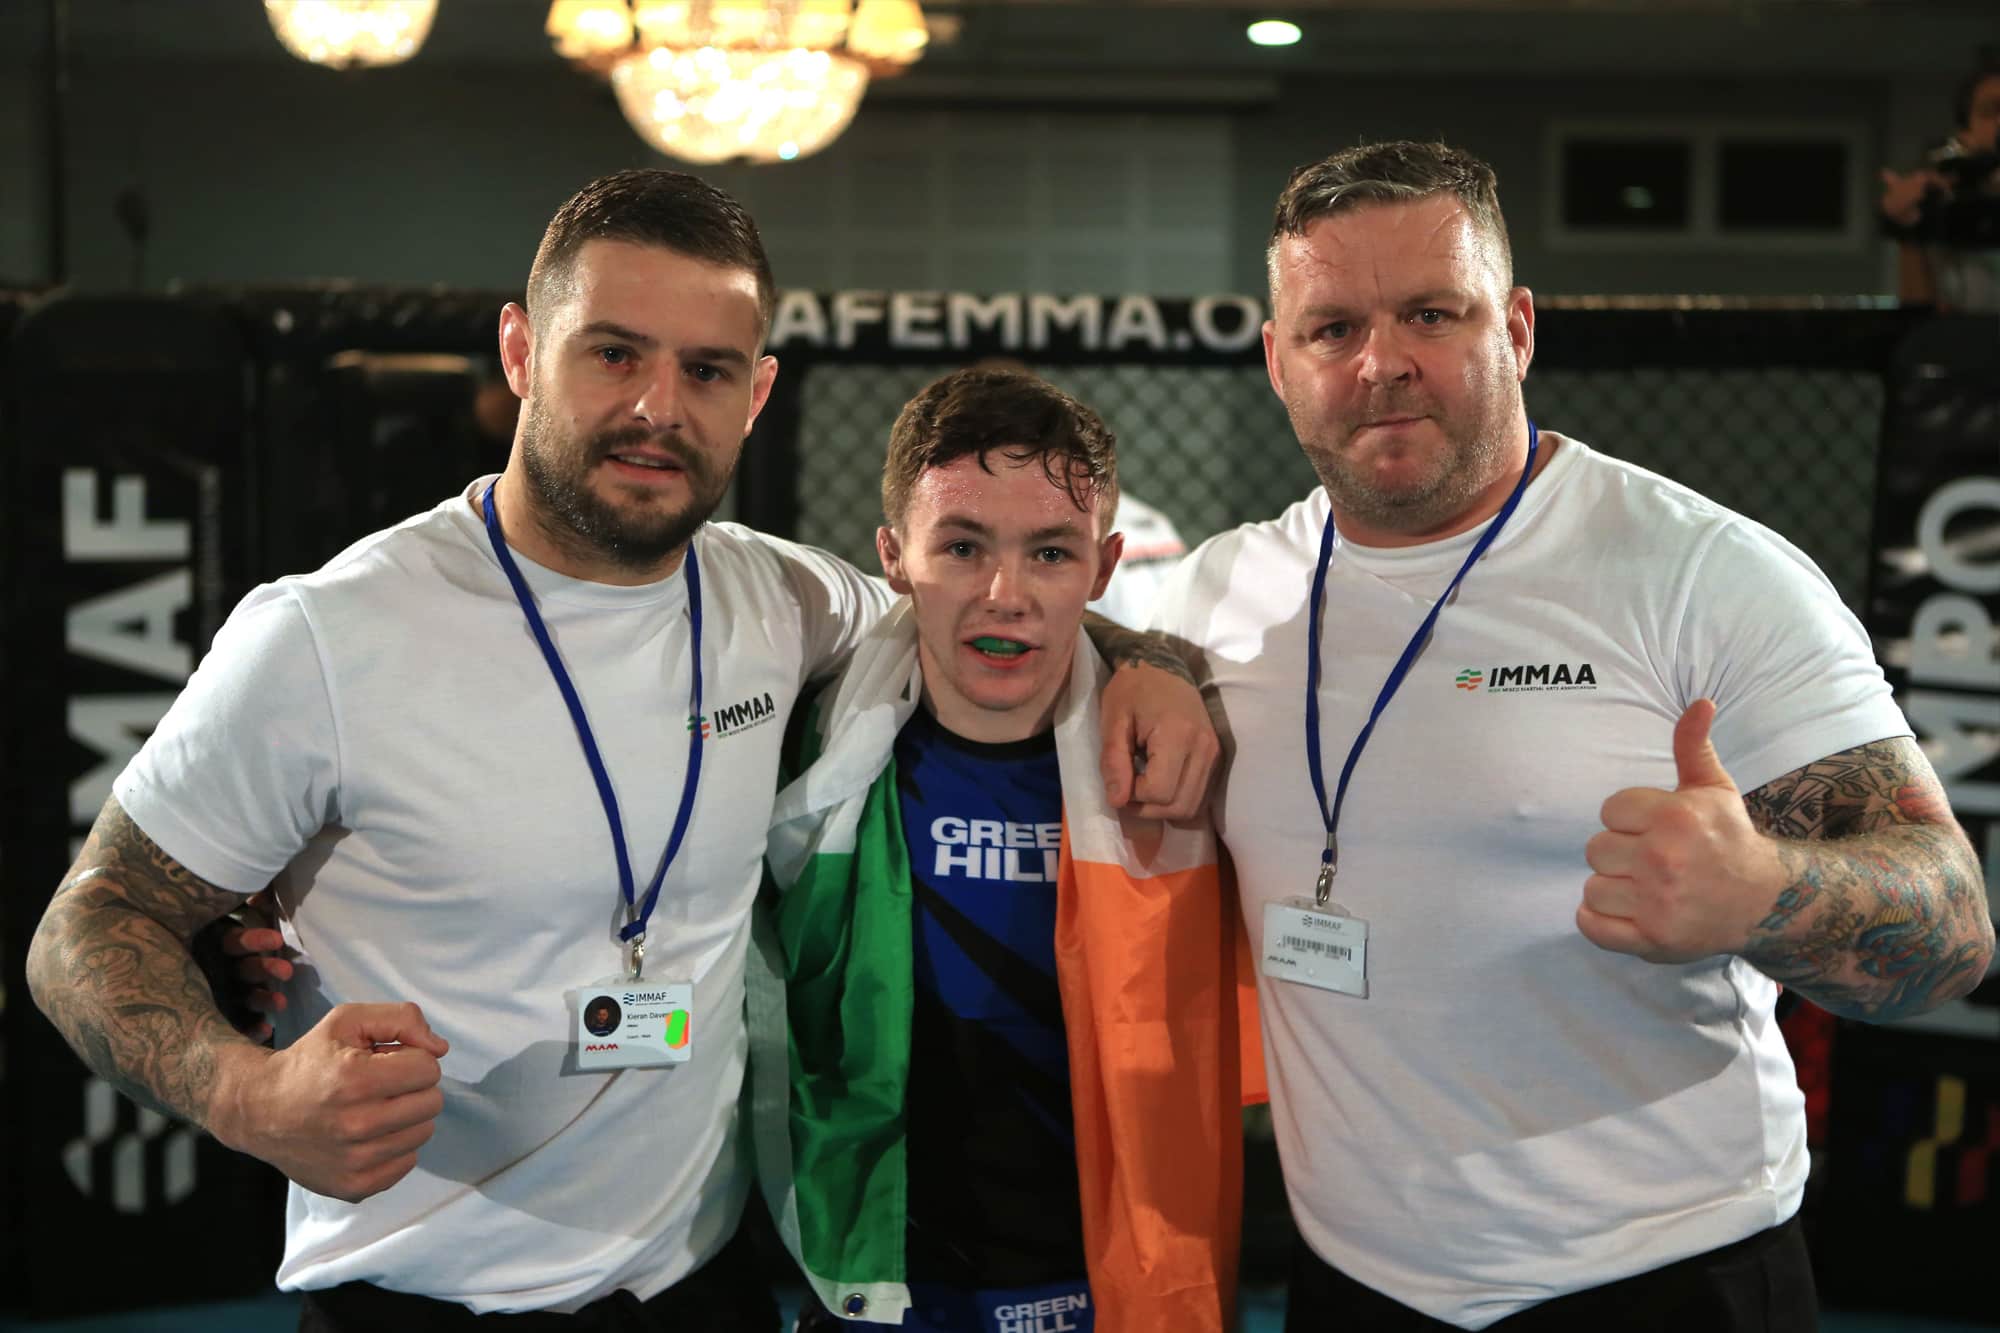 Irish Mixed Martial Arts Association Head Coach Andy Ryan Steps Down After Five Years